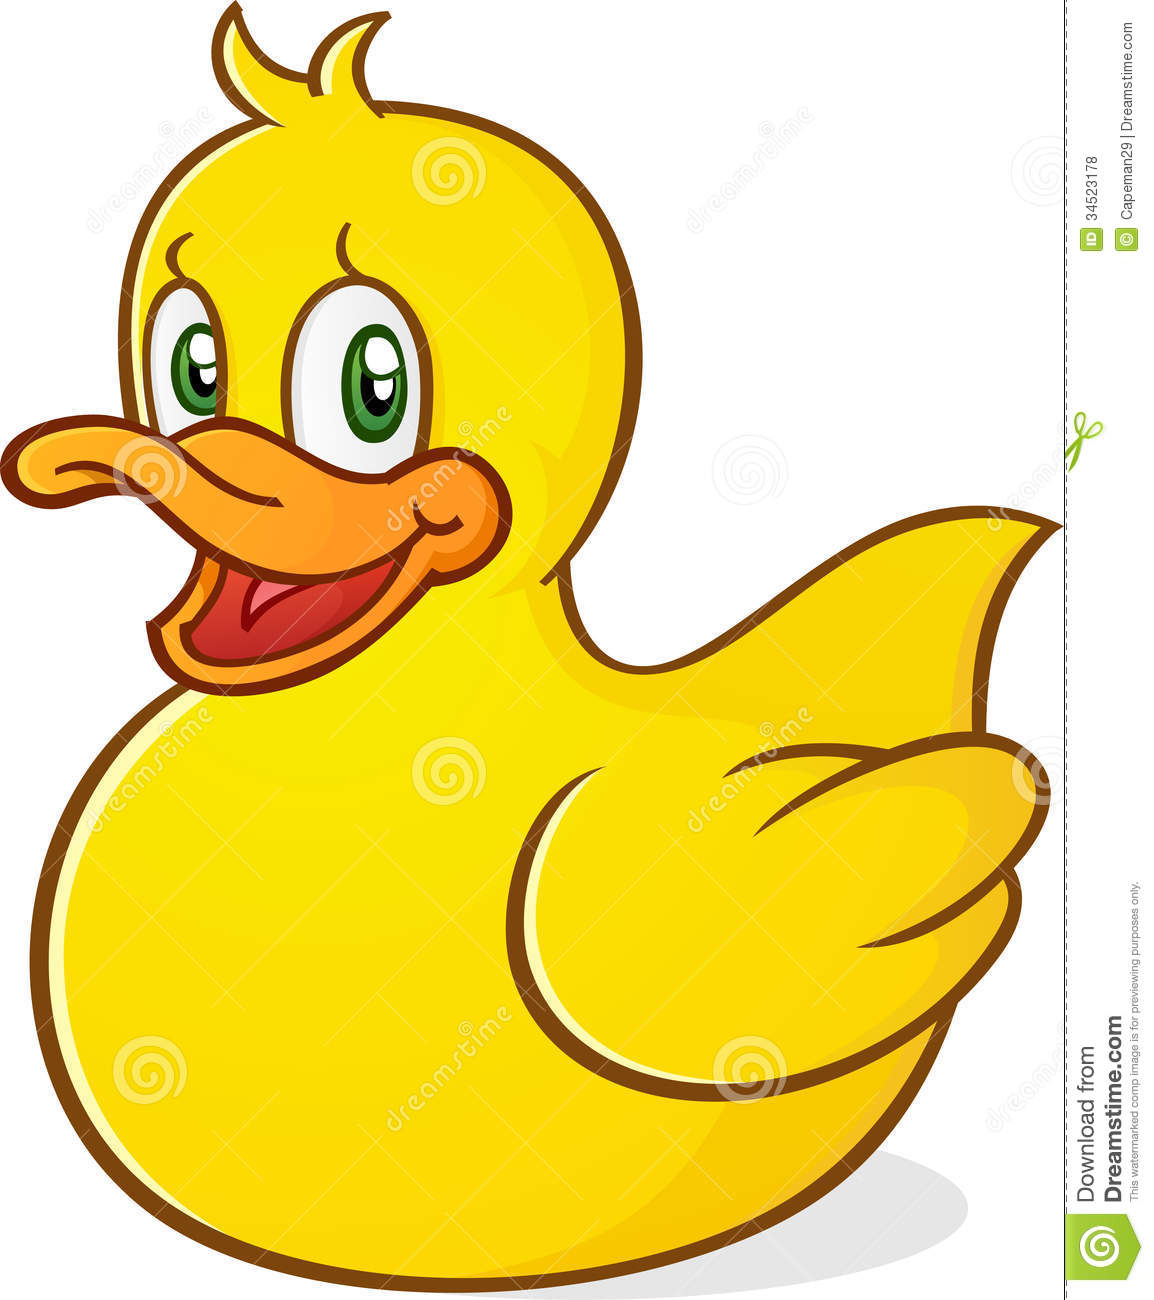 Duckling clipart #5, Download drawings